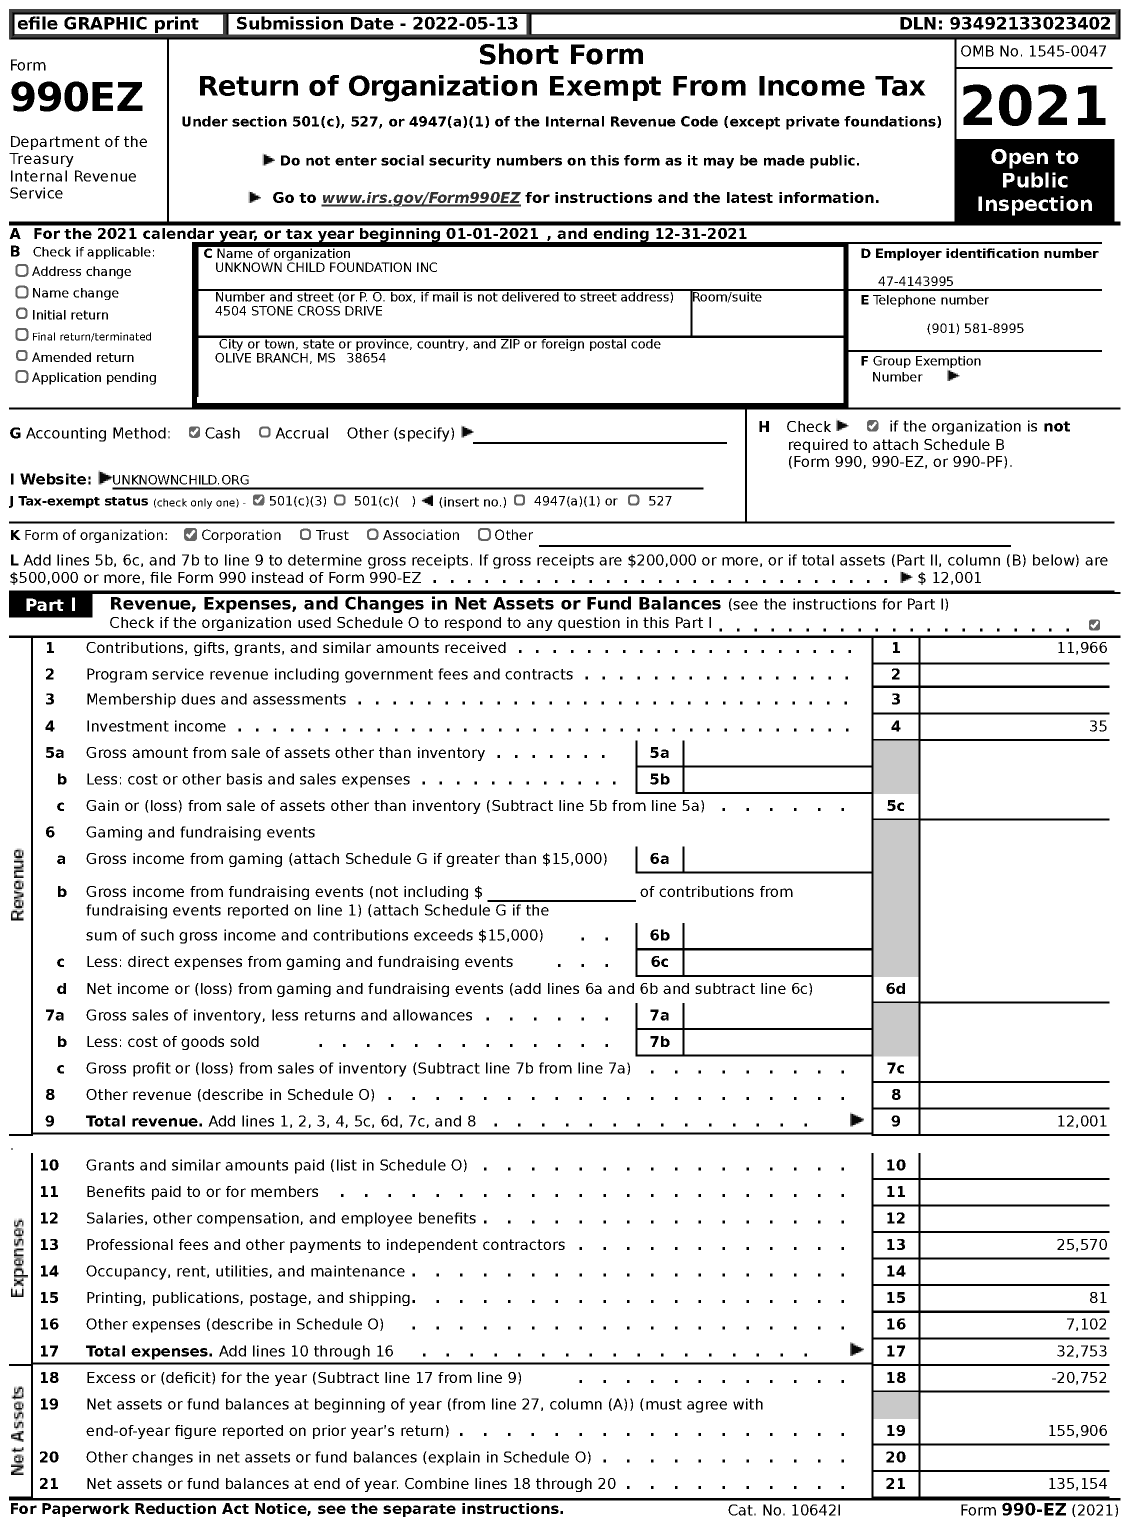 Image of first page of 2021 Form 990EZ for Unknown Child Foundation